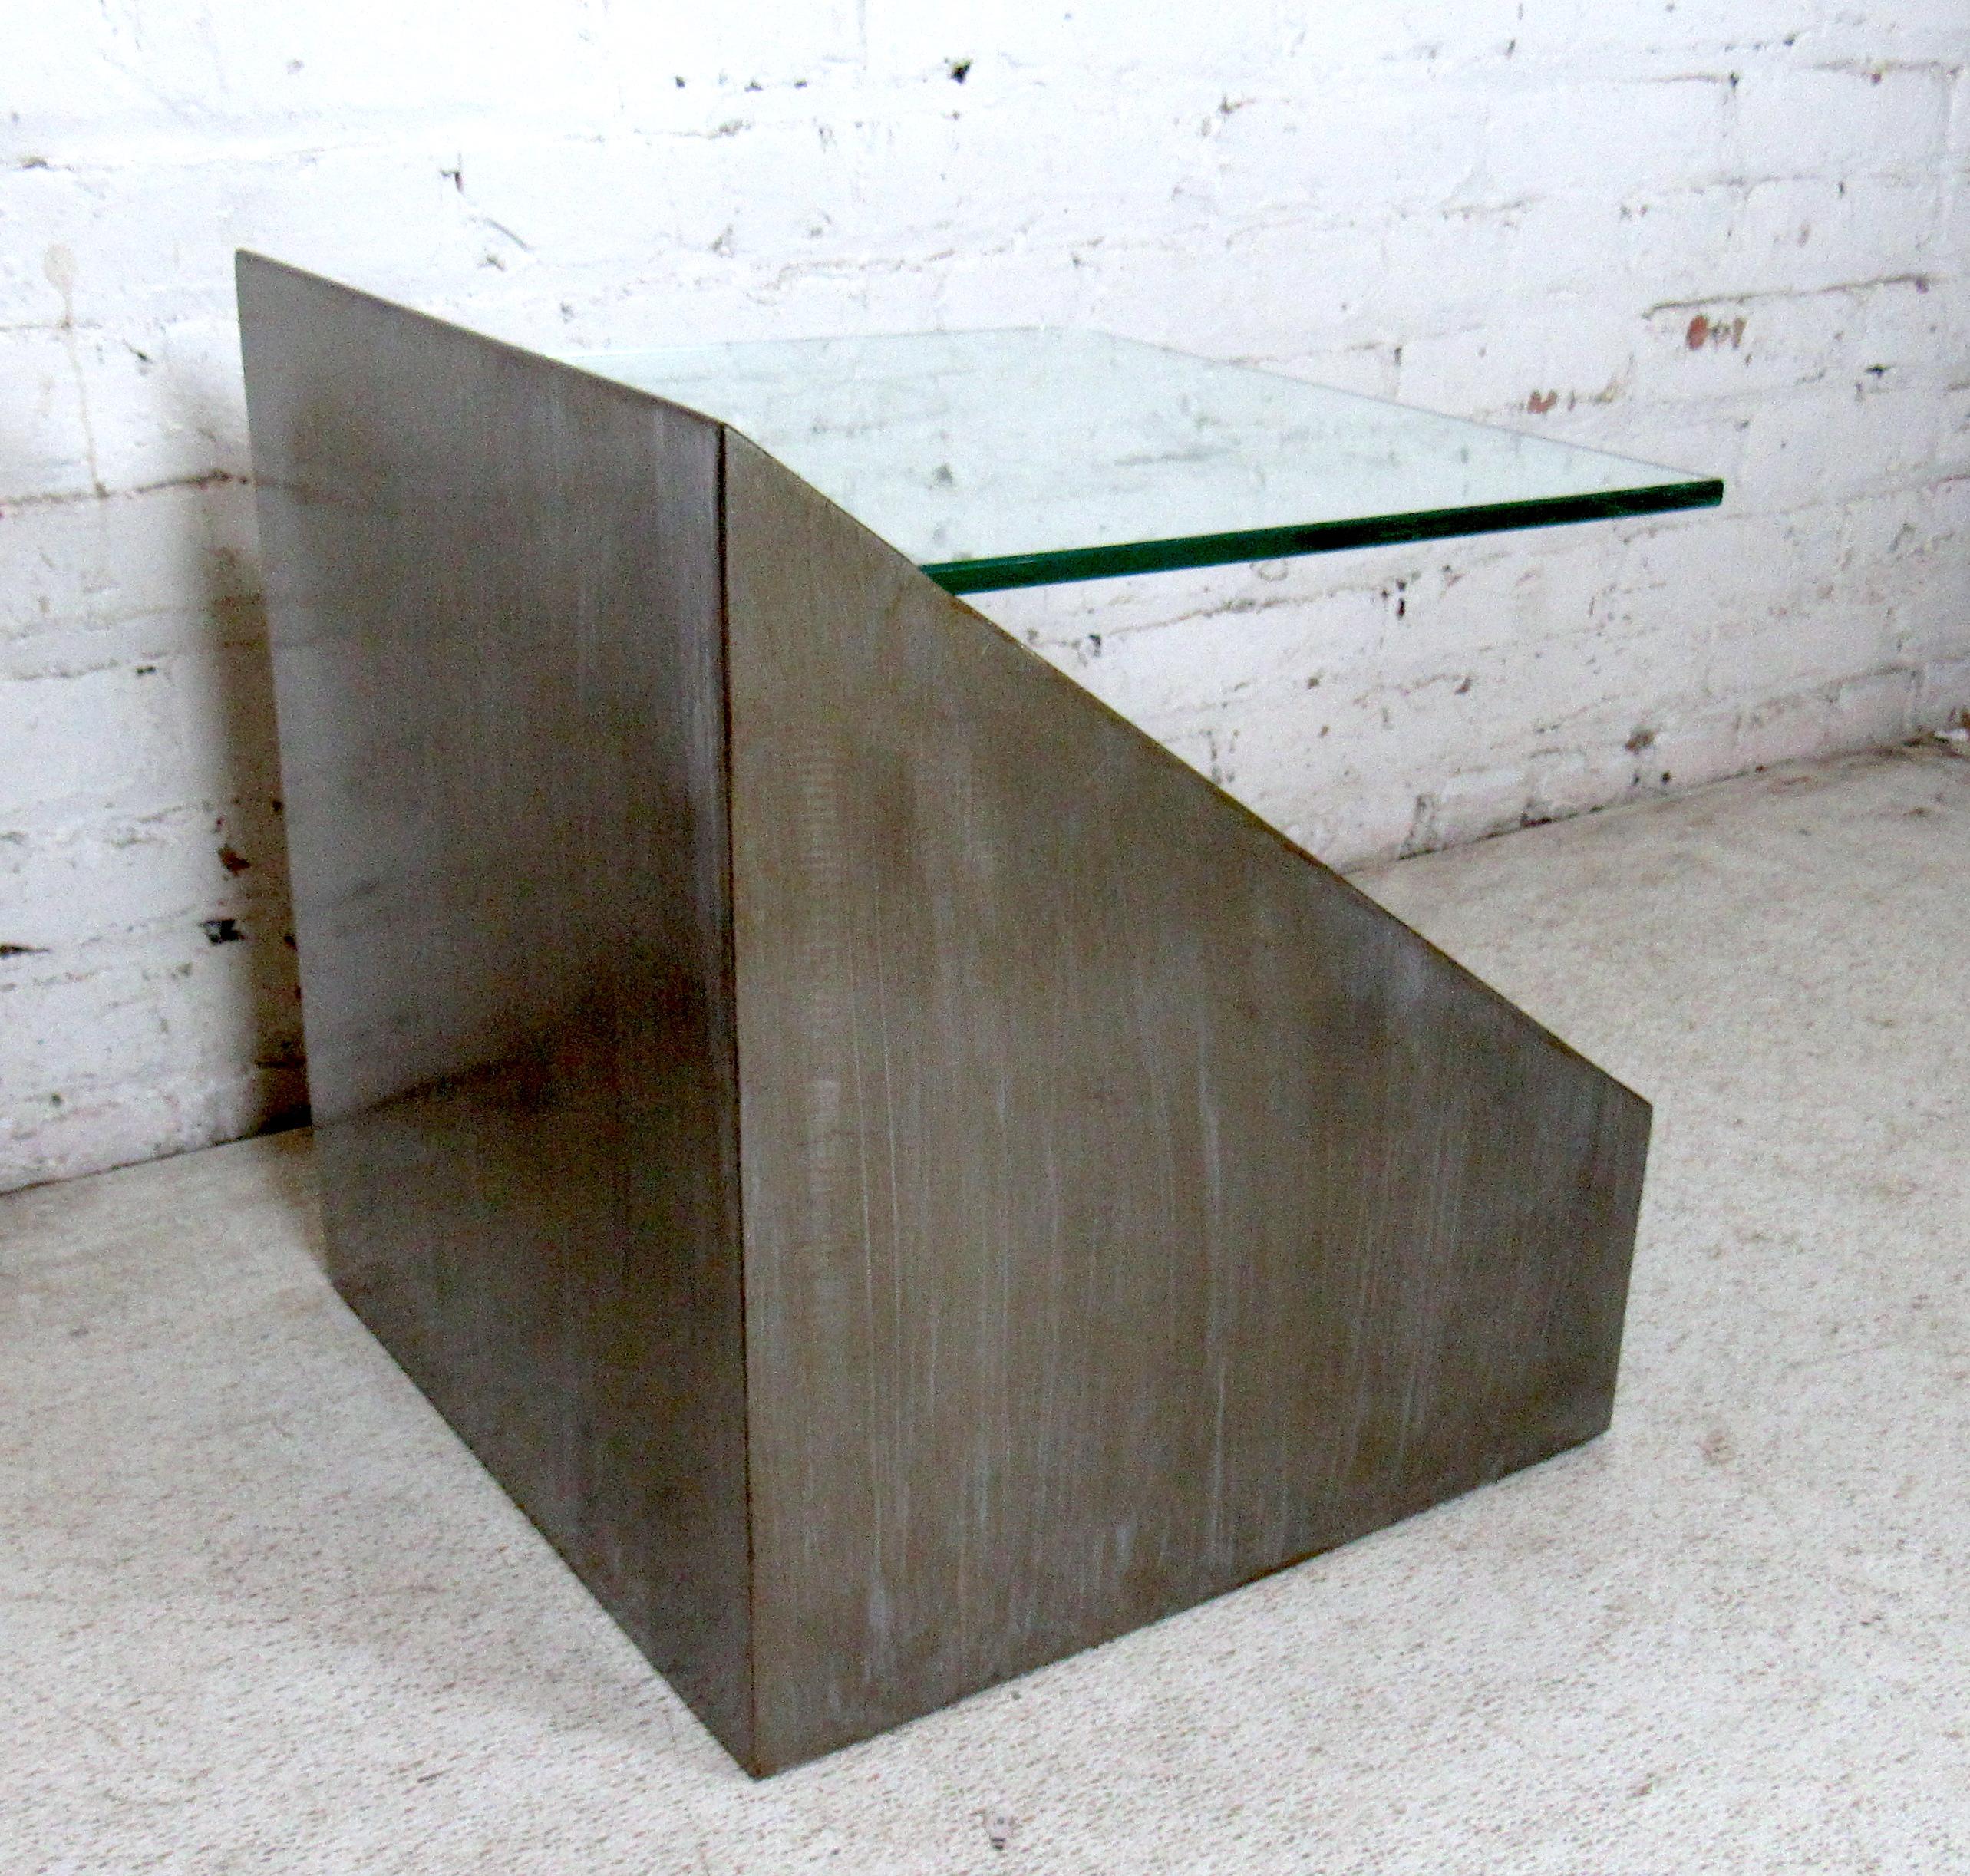 Industrial metal side table featuring a glass top that sits in the base.

Please confirm item location (NY or NJ).